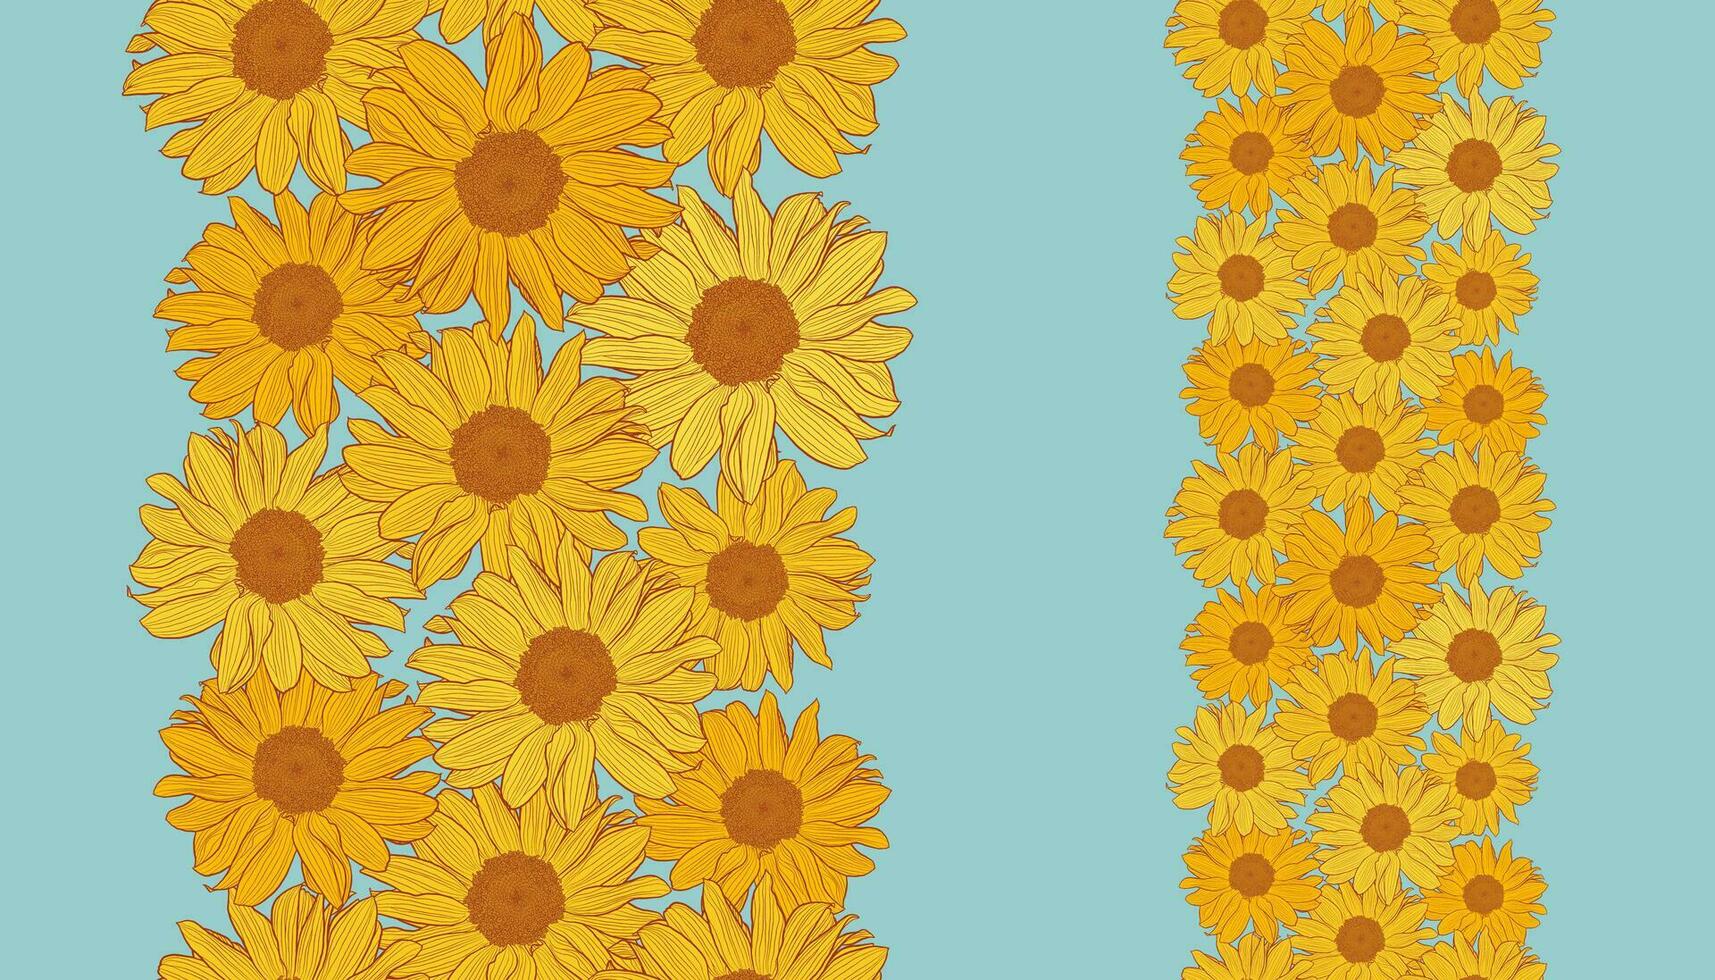 Vector vertical seamless border with yellow sunflowers with bronze outline on powder blue background. Digital art. Decorative print for wallpaper, wrapping, textile, fabric, label design.